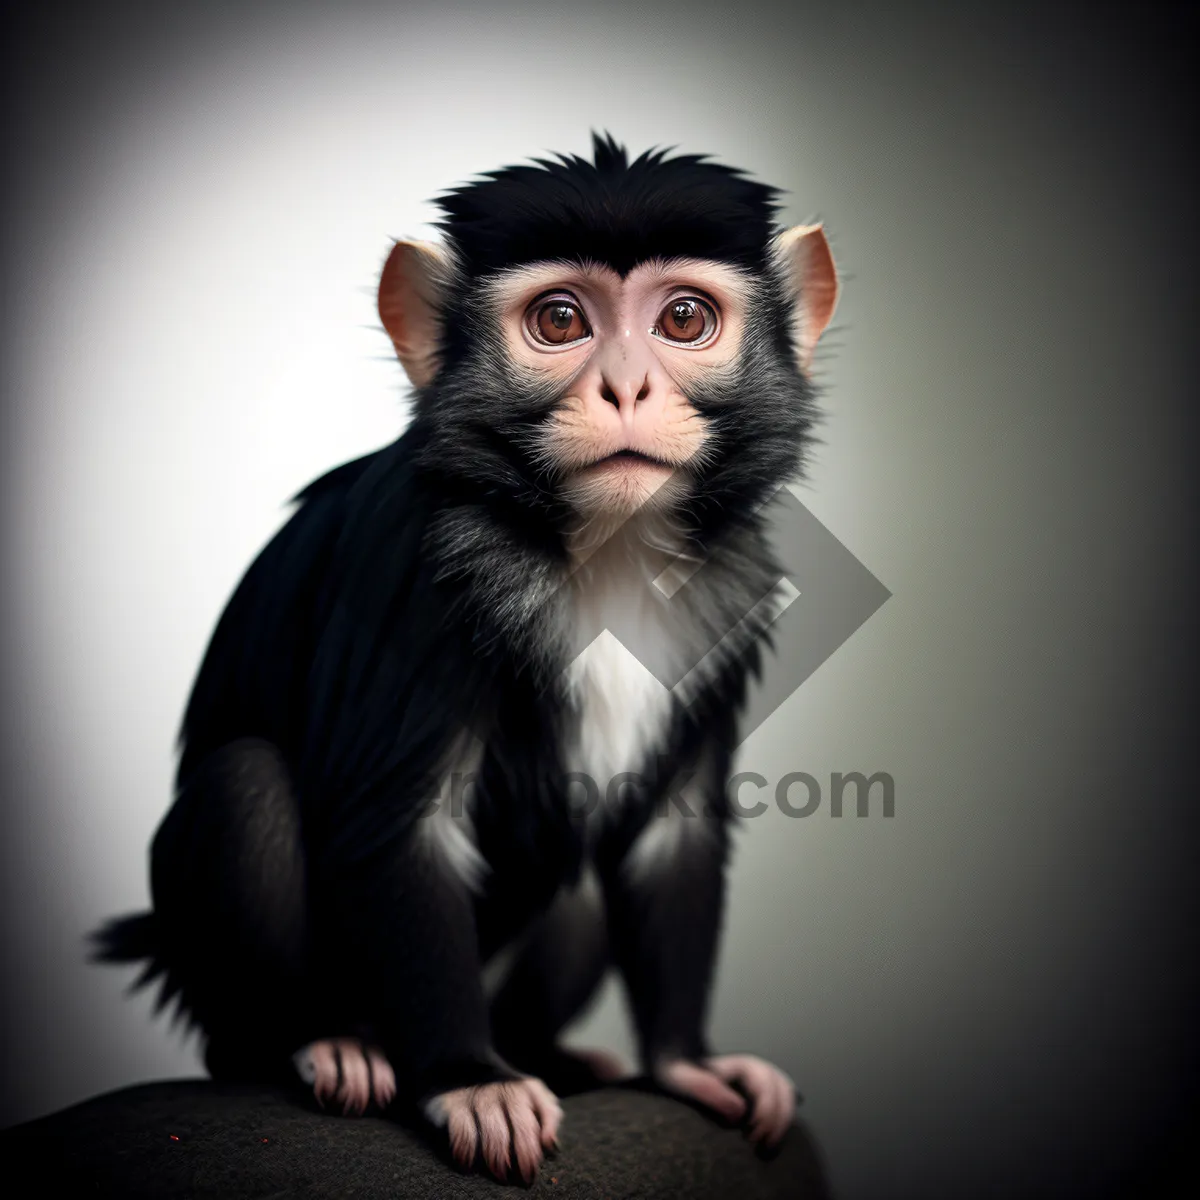 Picture of Mystic Primate: Cute Black-Faced Ape with Piercing Eyes